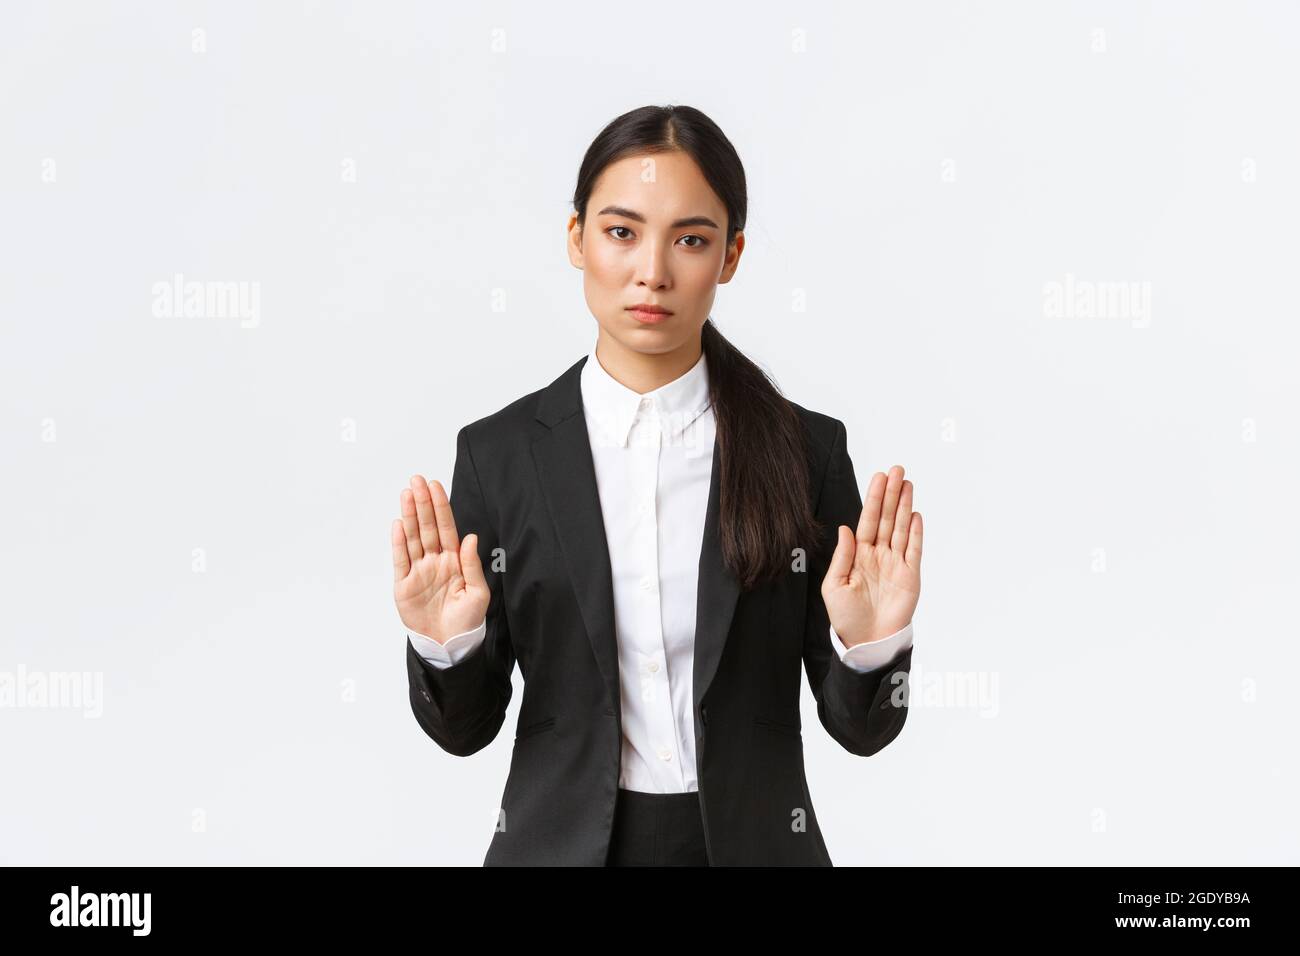 Happy Relaxed Elegant Business Woman Walking and Buttoning Black Suit.  Stock Image - Image of female, achievement: 142198409